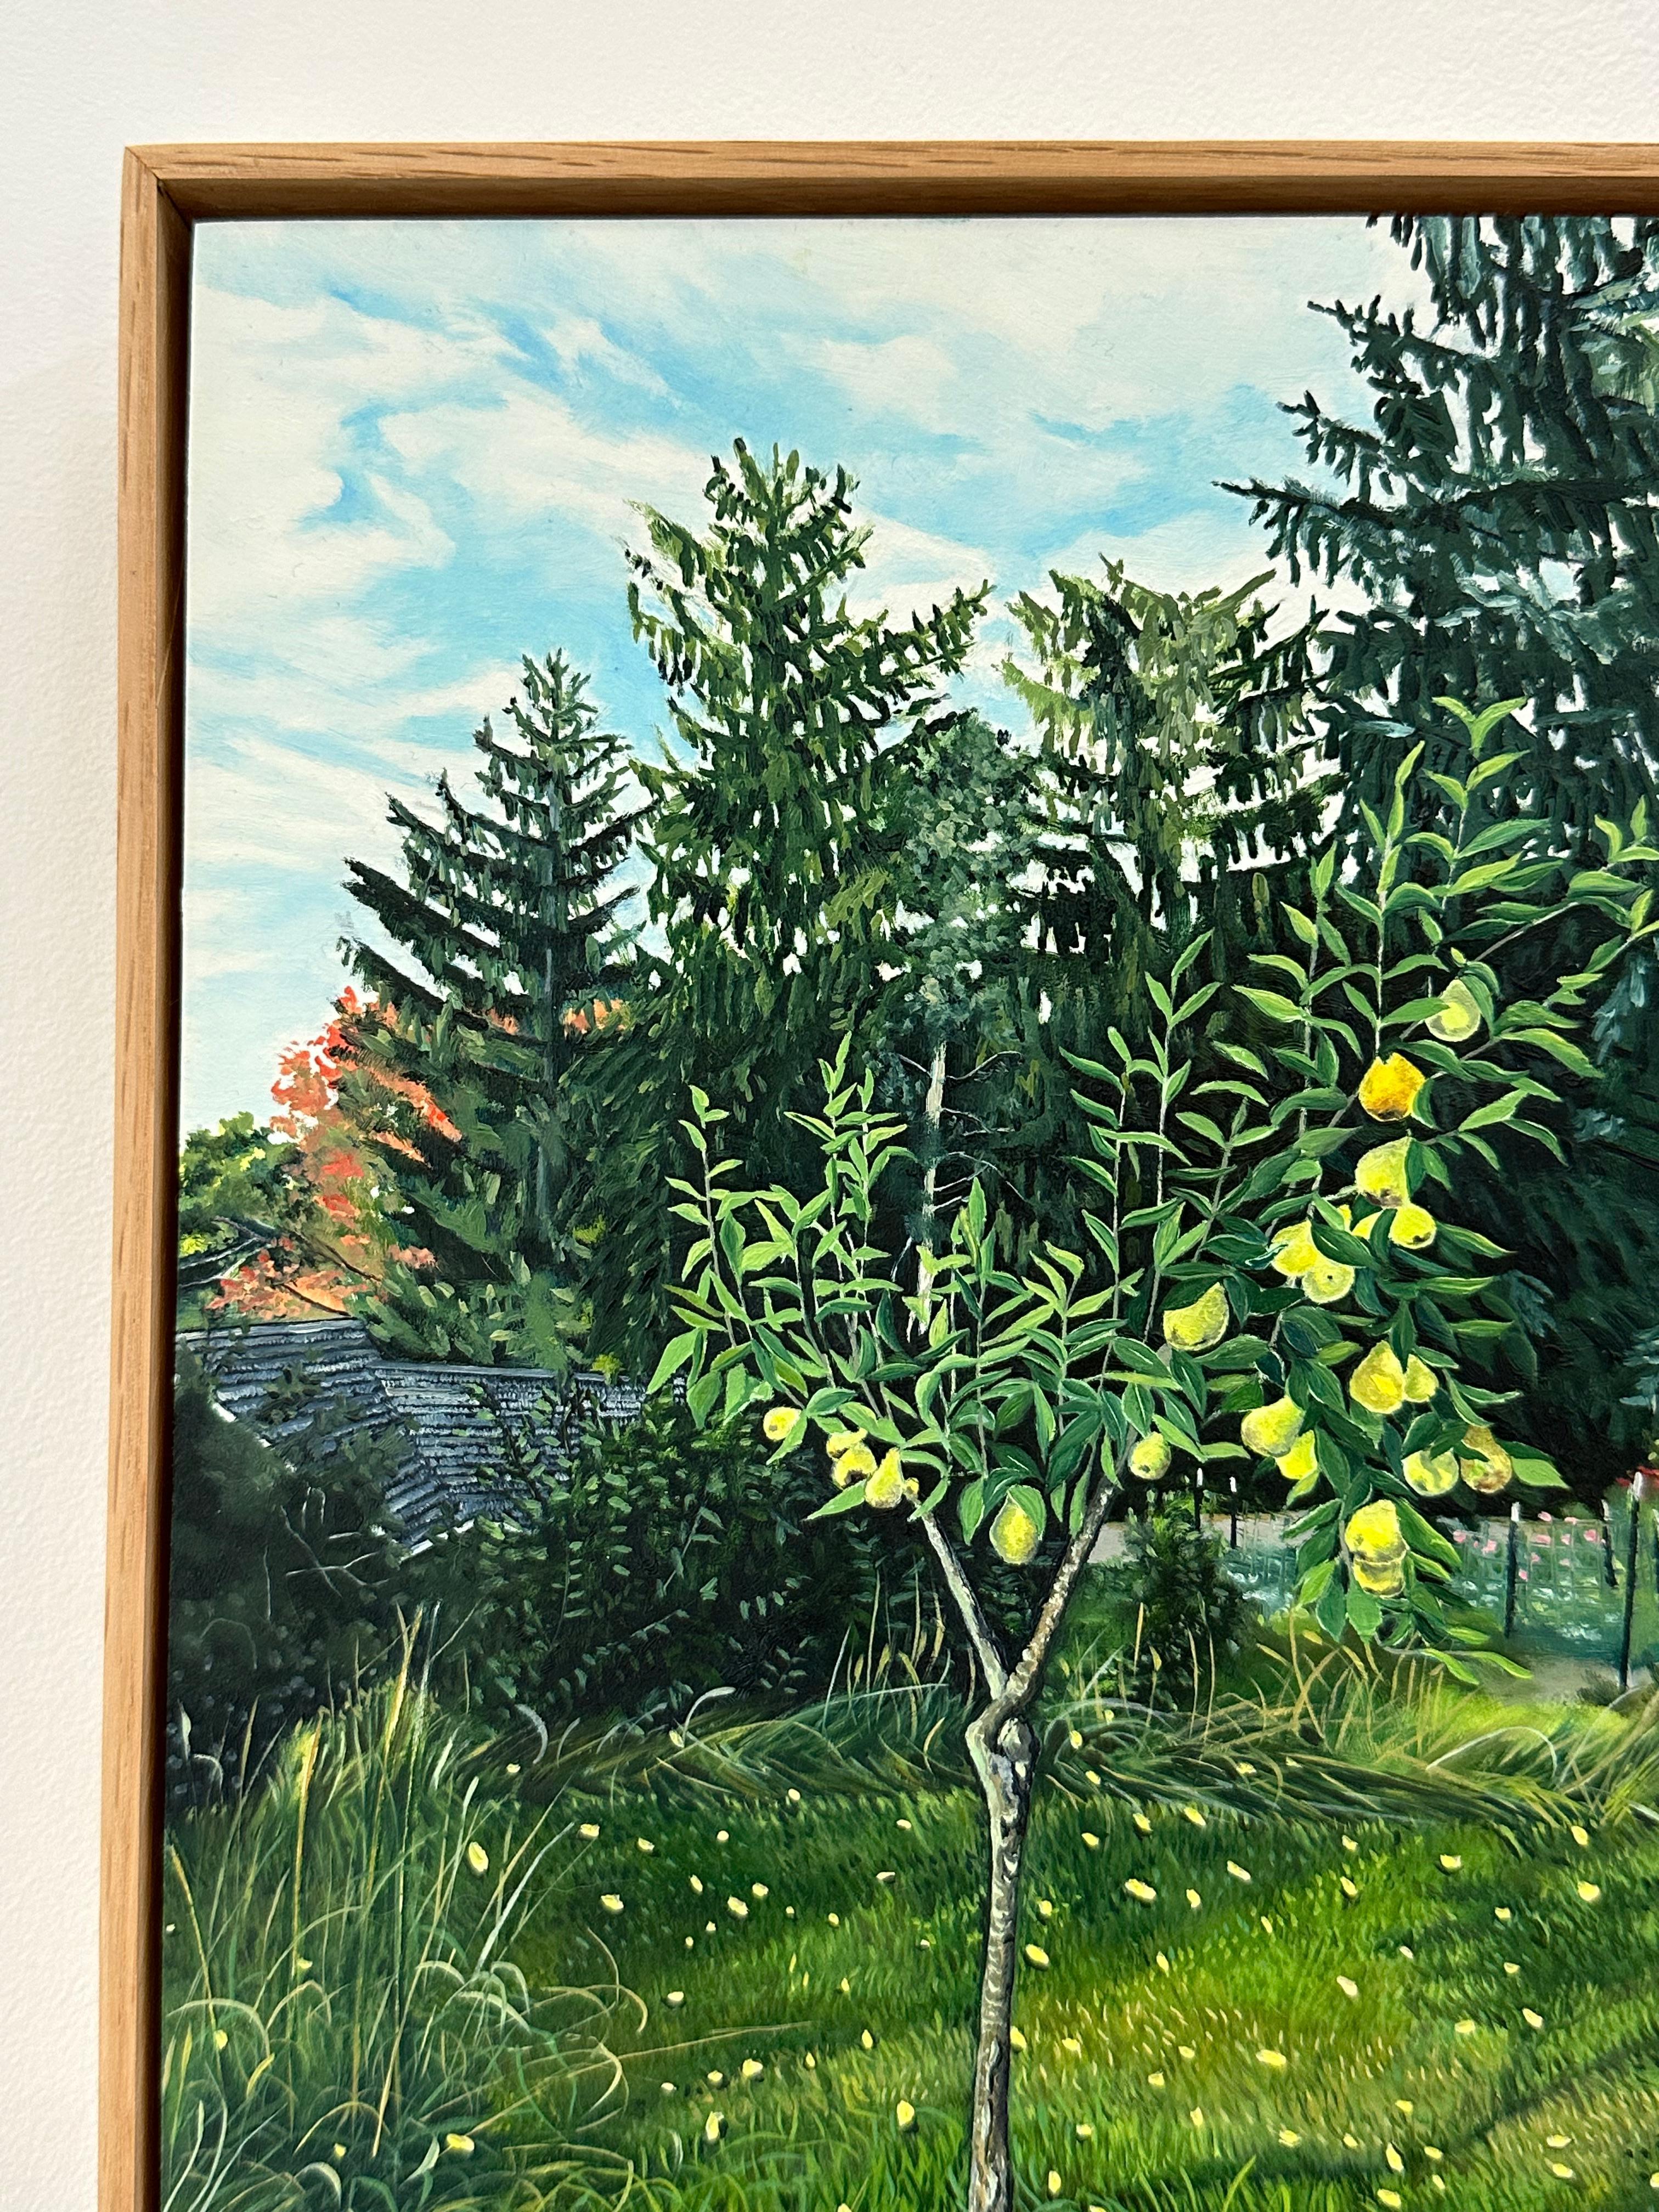 Backyard Pear, Yellow Fruit, Green Leaves, Grass, Trees, Blue Sky Clouds, Garden - Contemporary Painting by Amanda Acker